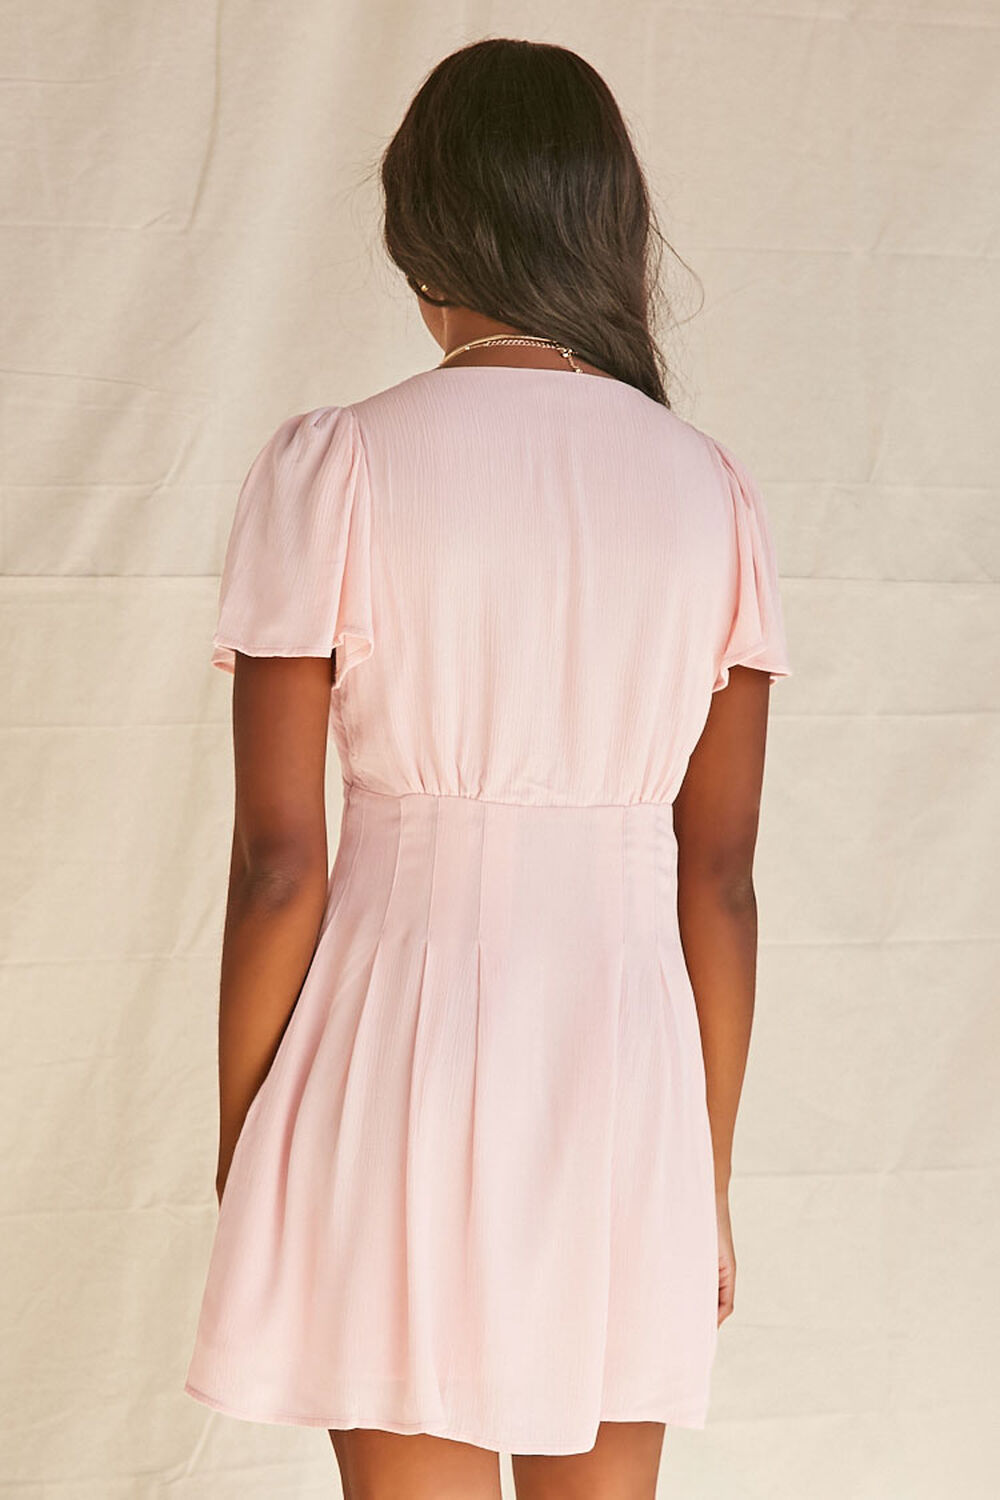 PINK Bell Sleeve Fit & Flare Dress, image 3